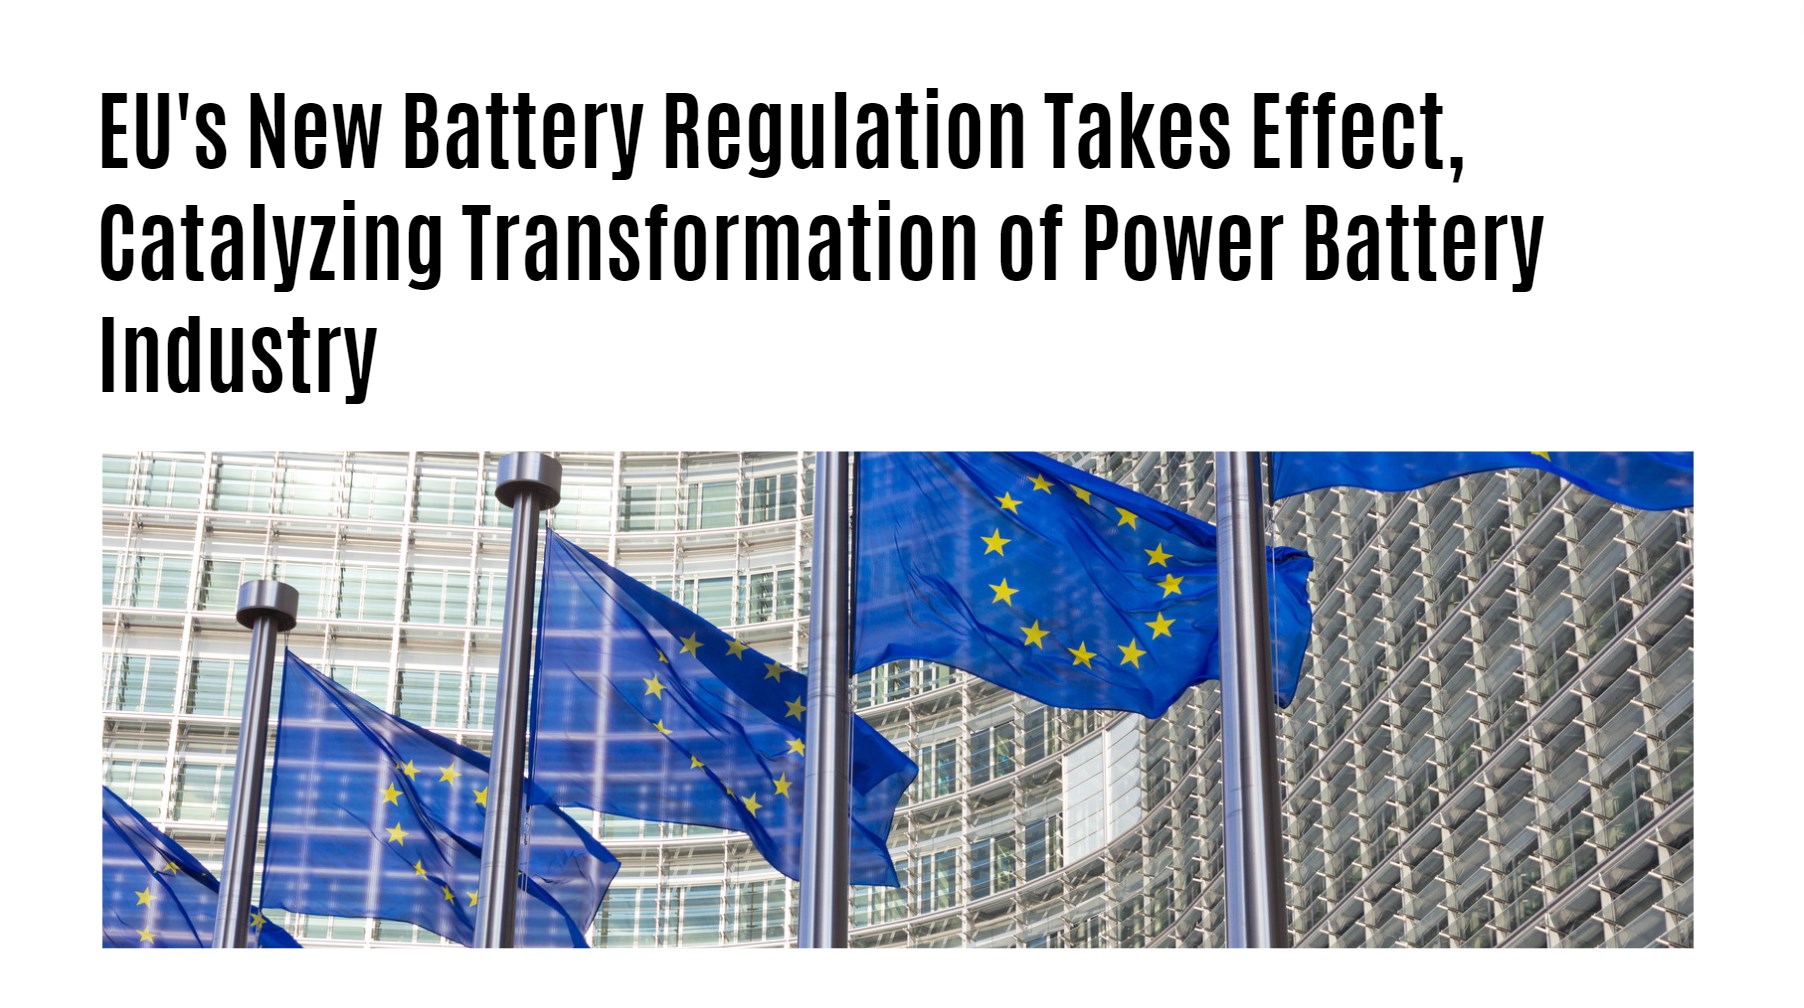 EU's New Battery Regulation Takes Effect, Catalyzing Transformation of Power Battery Industry